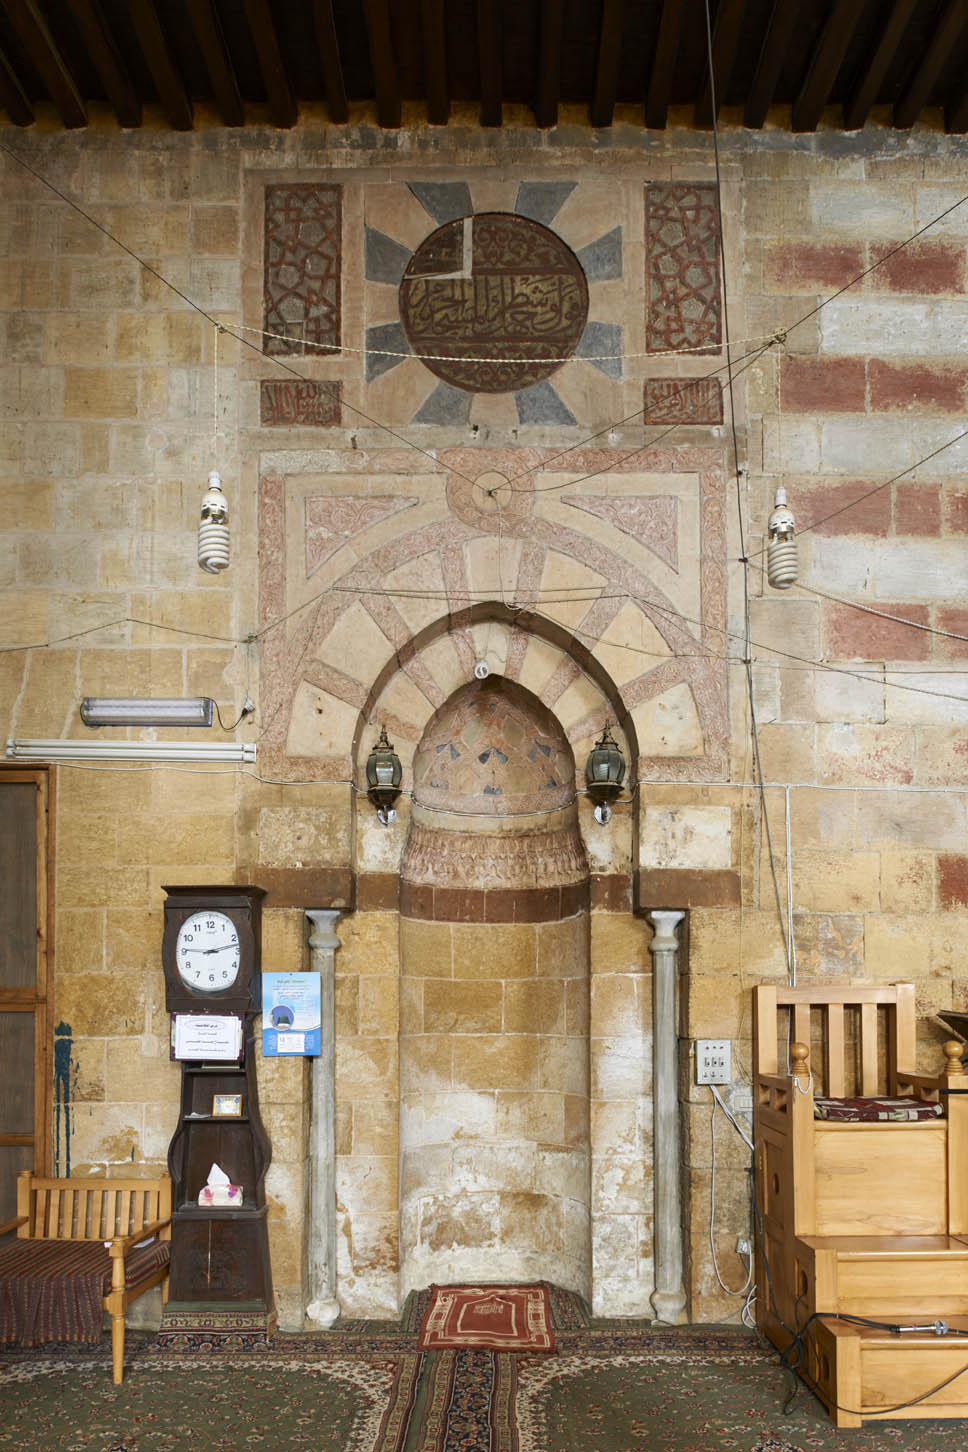 View of the mihrab, one of the view remaining Mamluk elements of the mosque